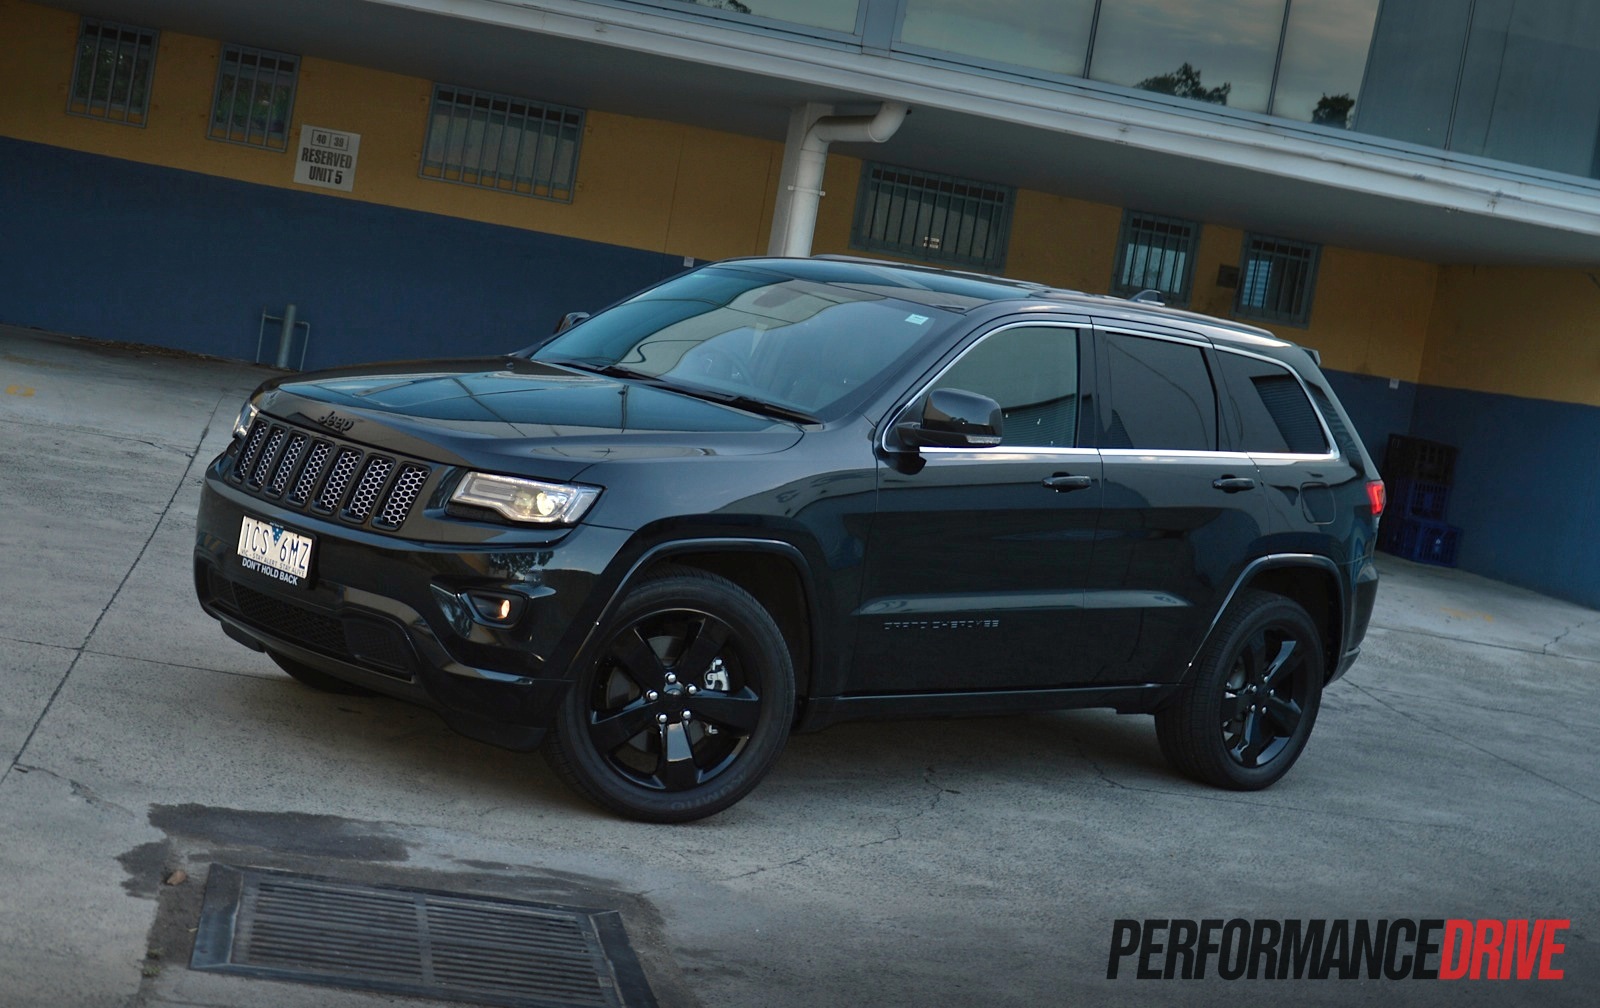 Should you buy a 2015 Jeep Grand Cherokee?